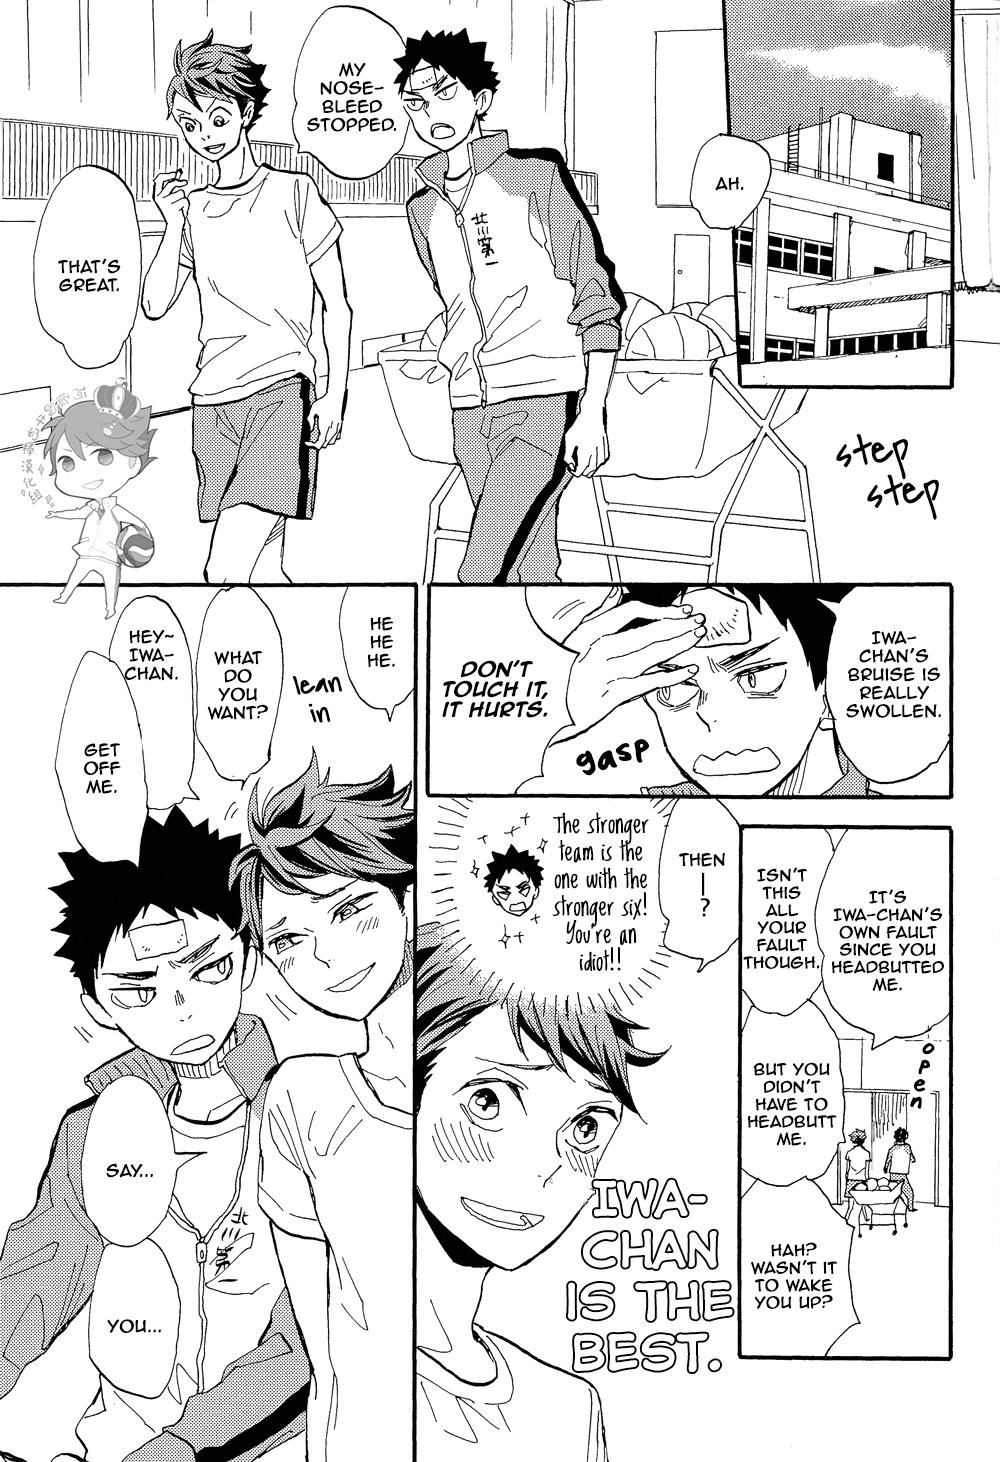 Iwachan is so Perverted 5